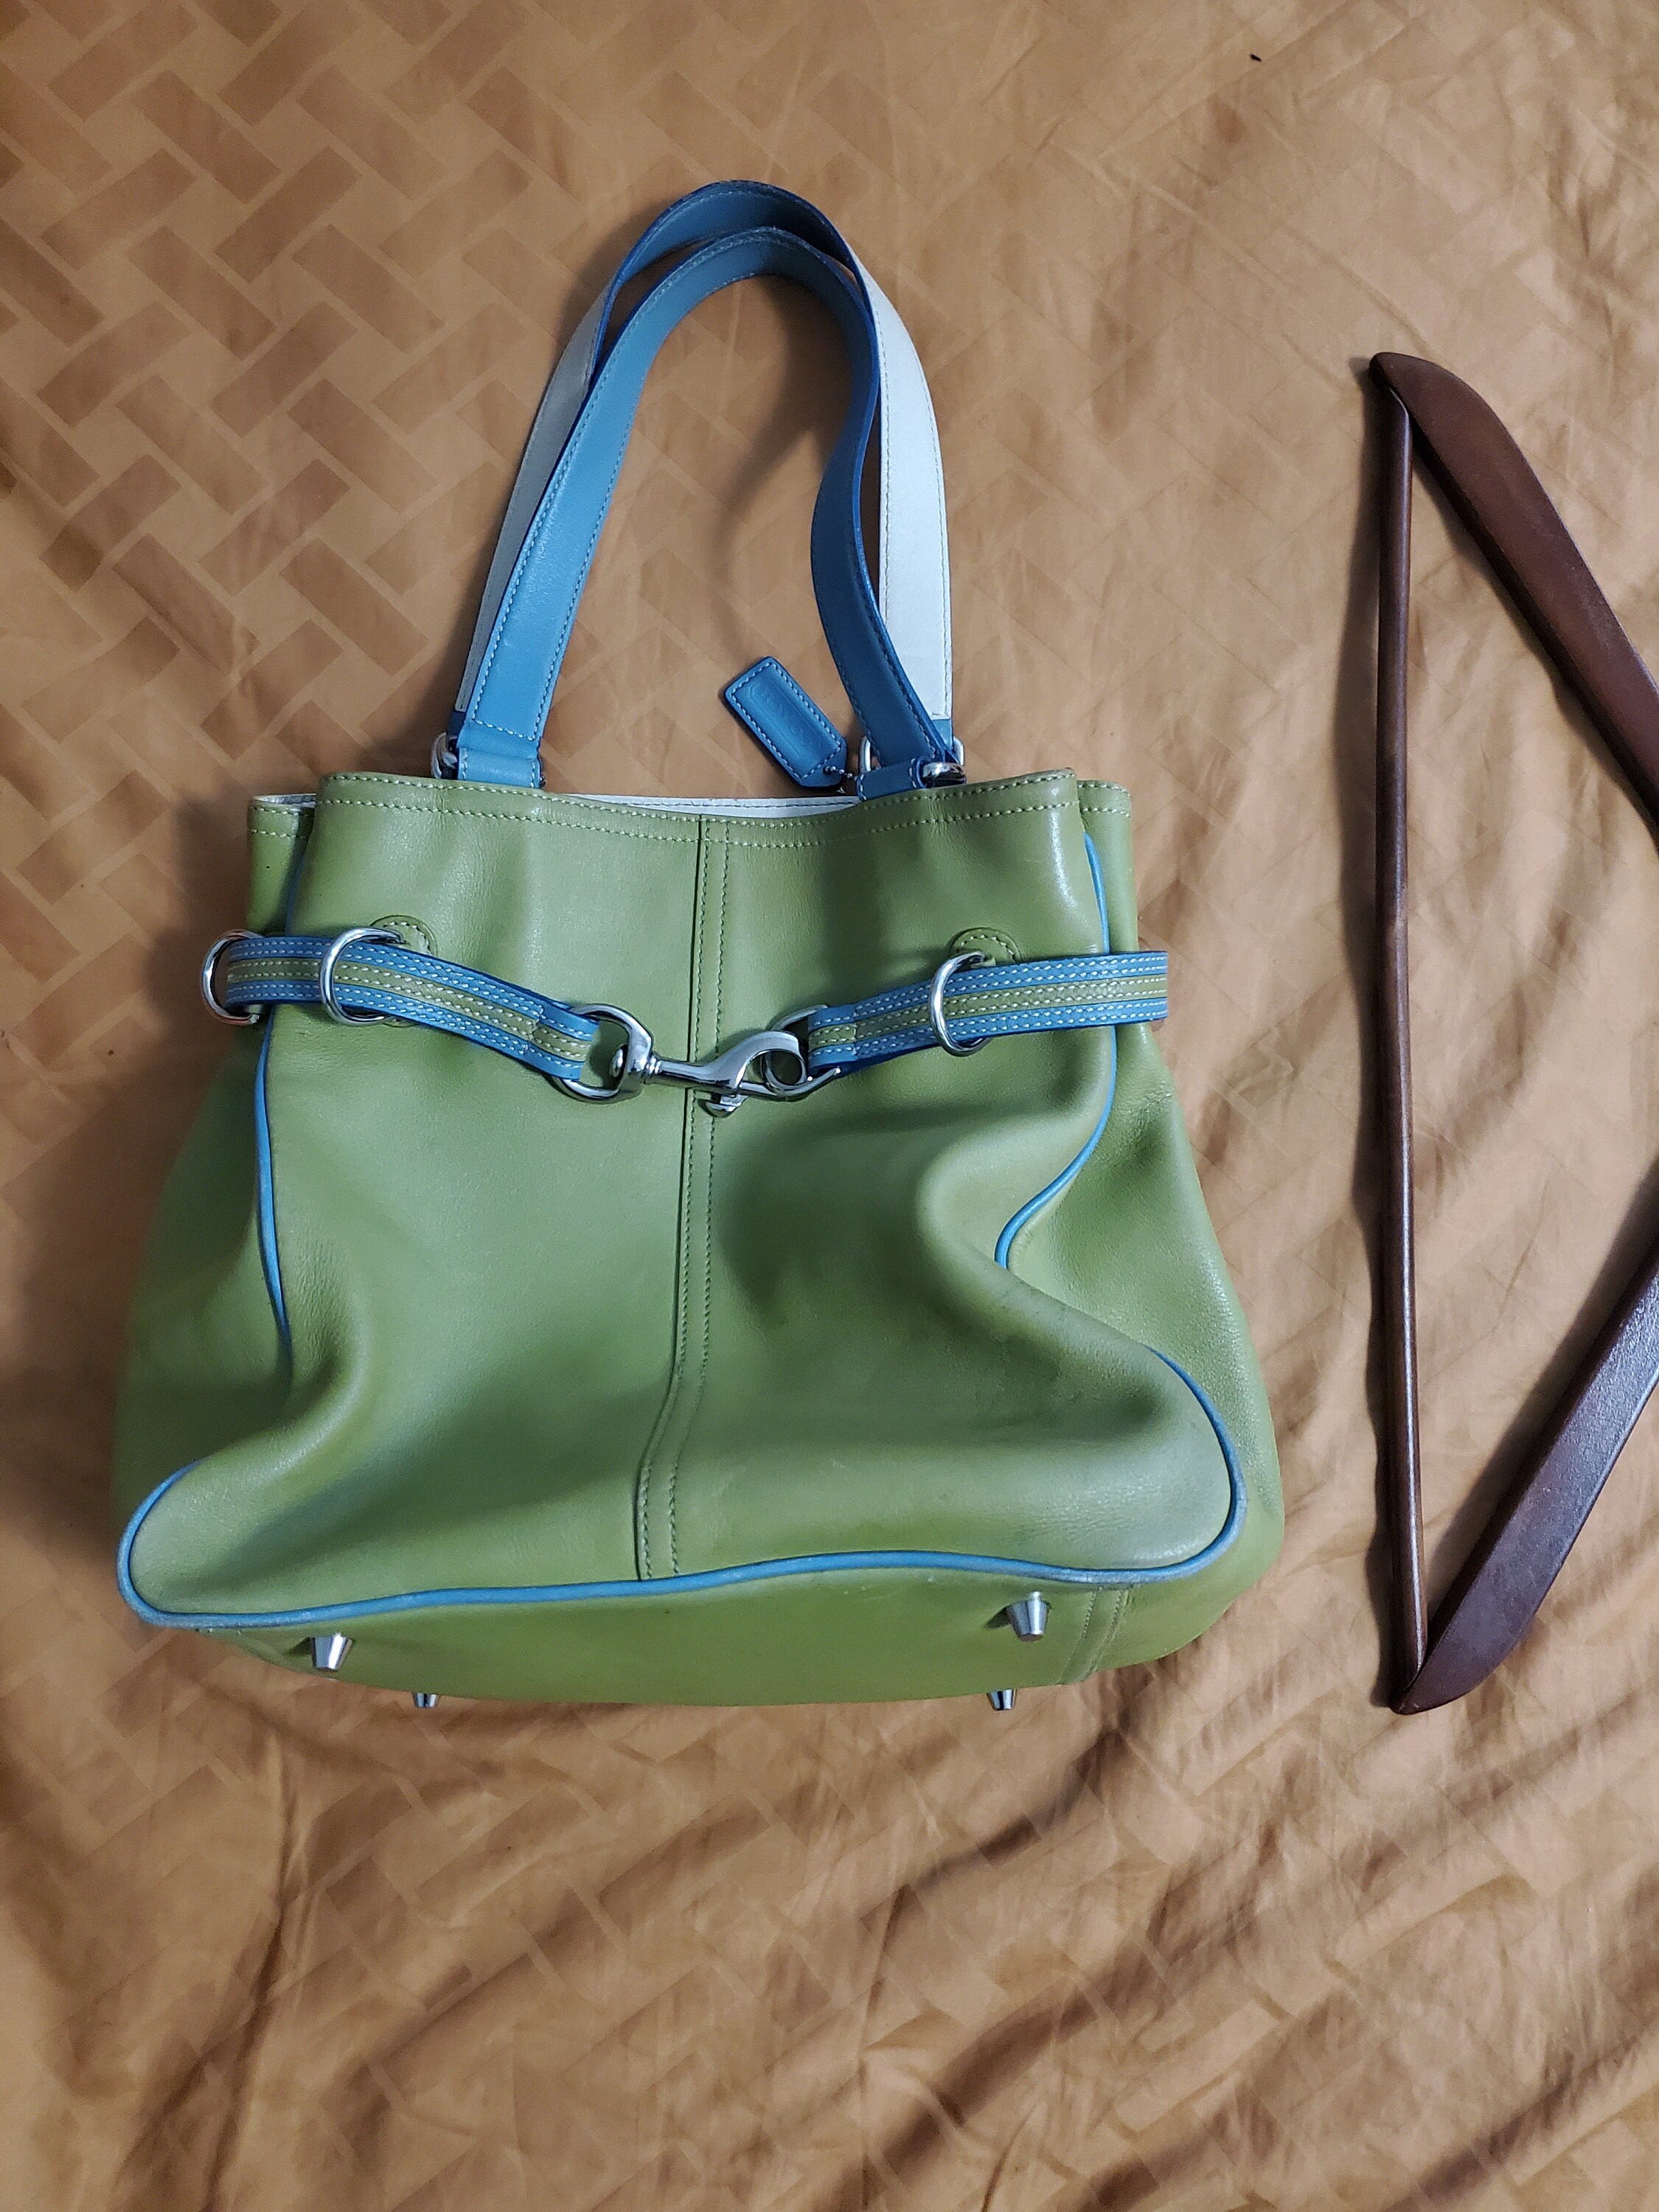 Coach Green Bag - For Sale on 1stDibs  army green coach purse, lime green  coach purse, vintage coach green bag